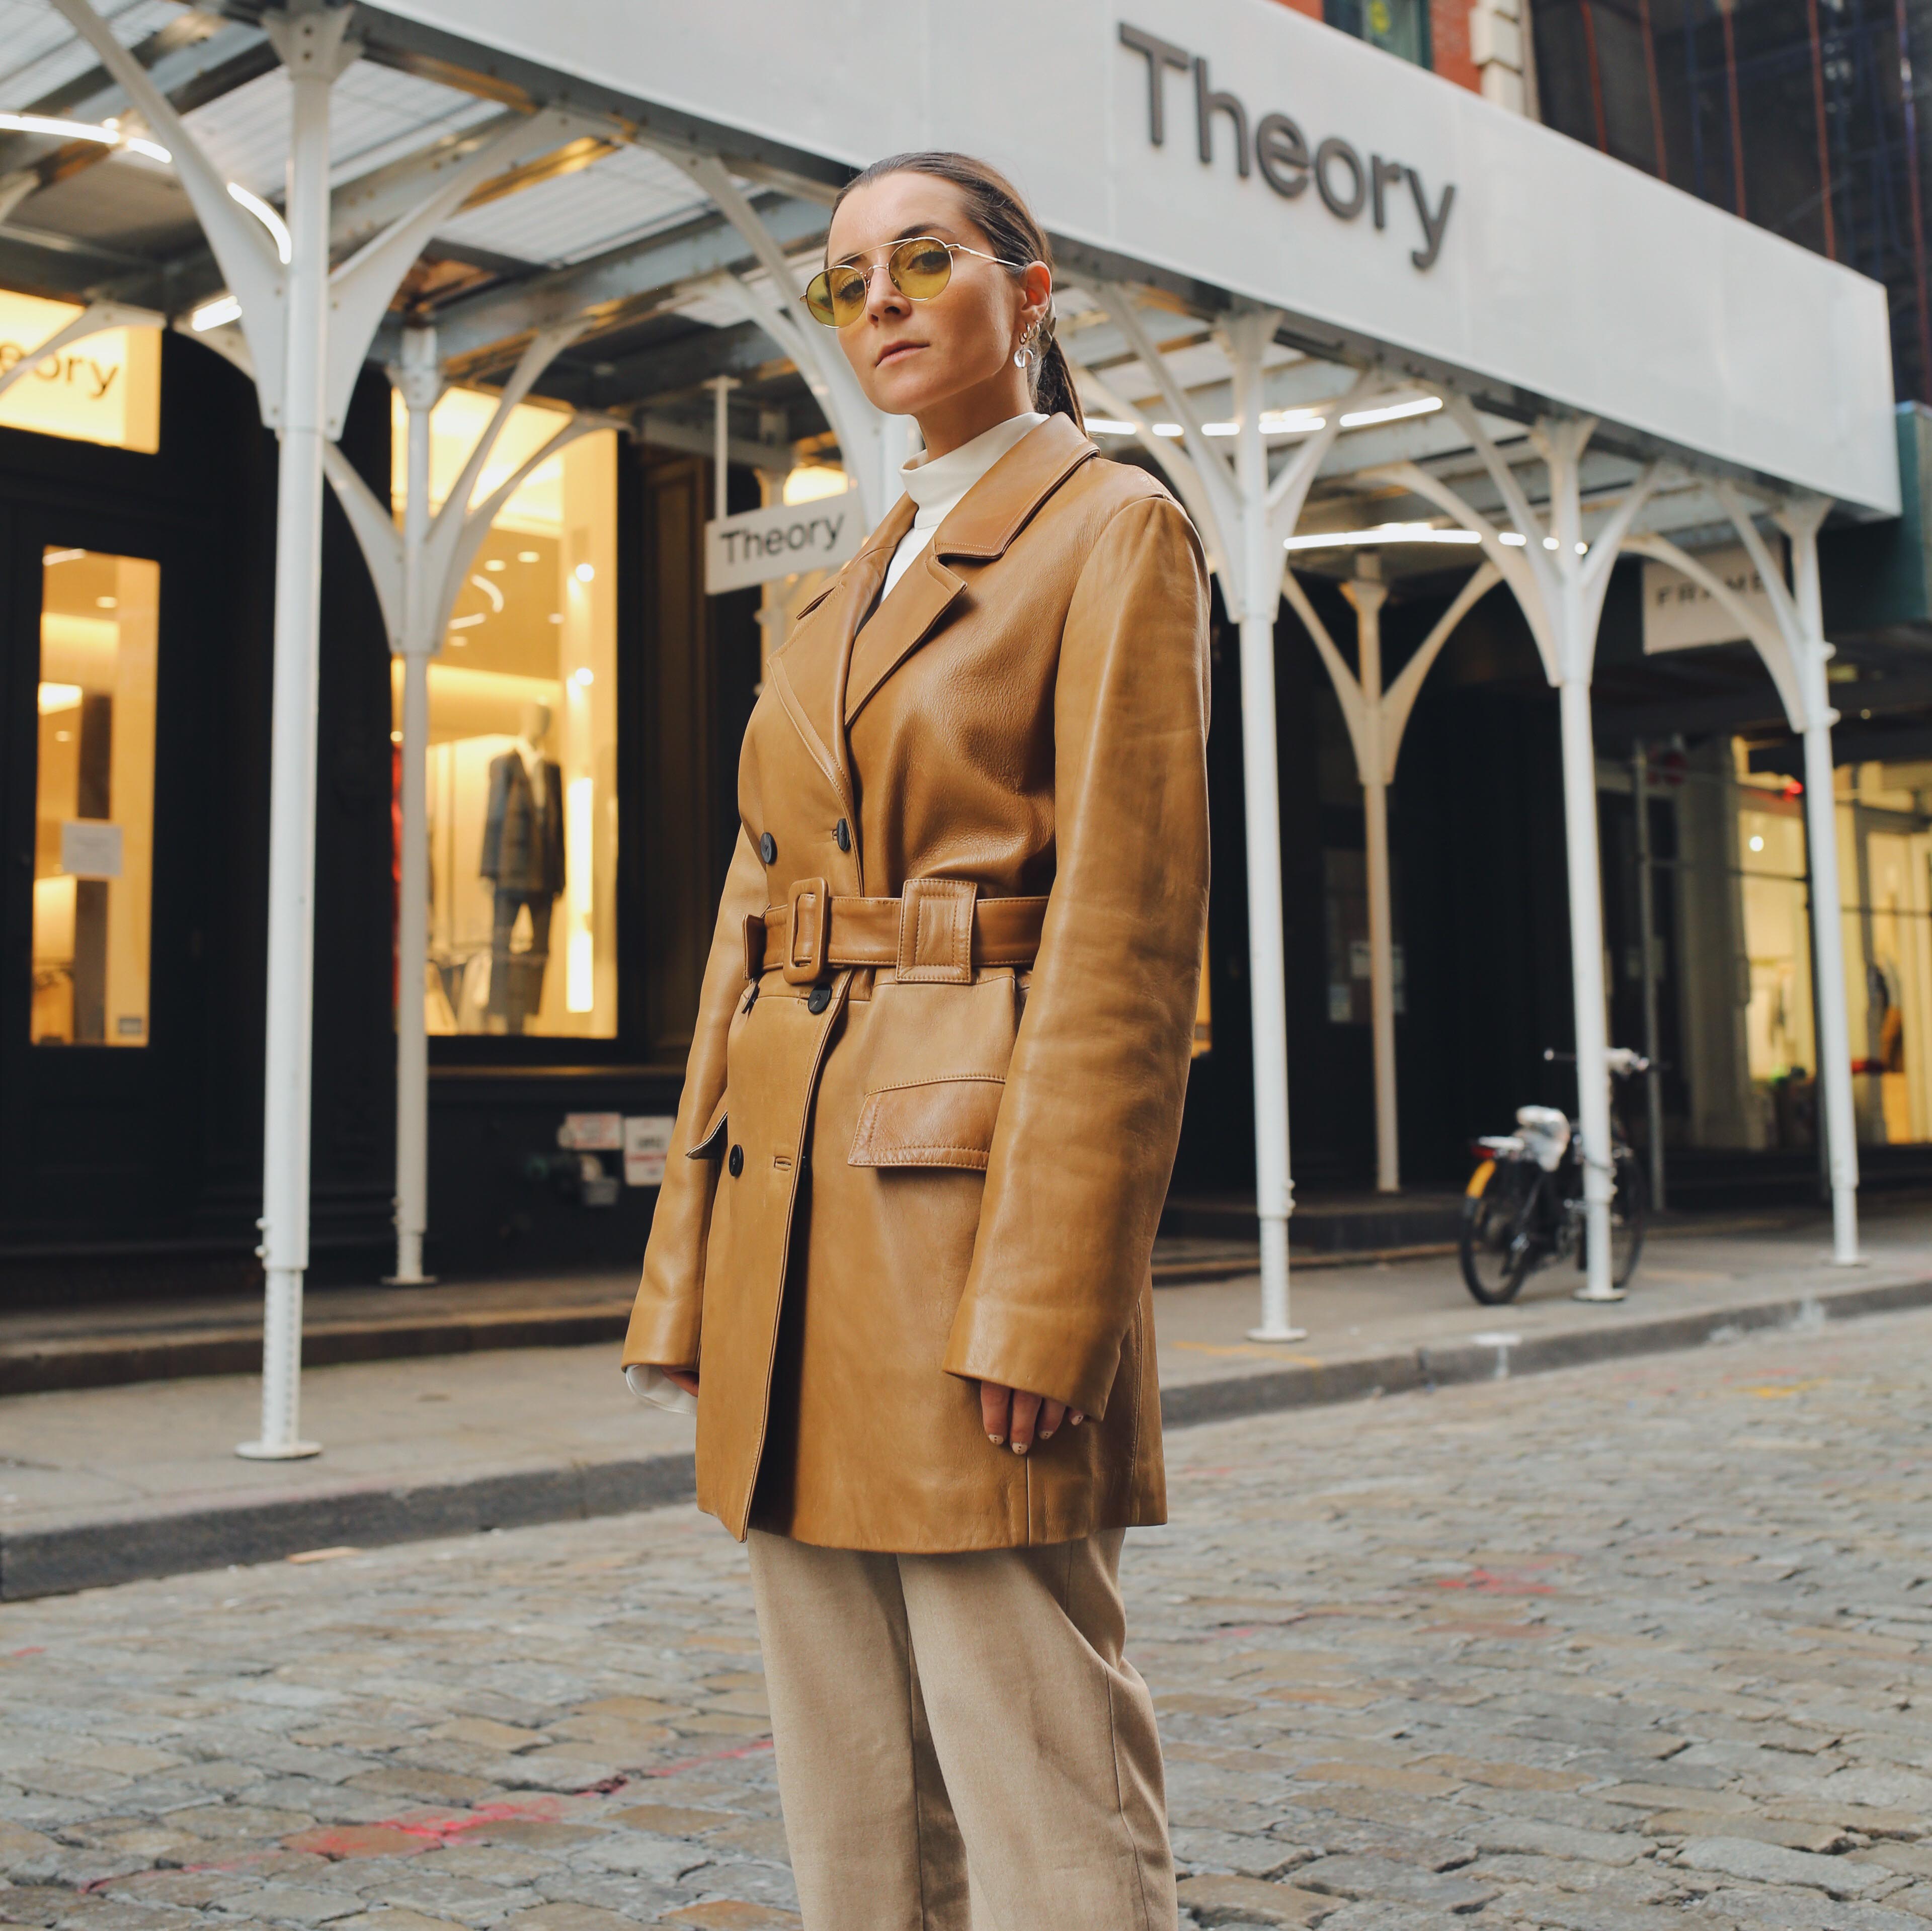 My favorite looks from NYFW to transition from summer to fall. Selection of some of my favorite items: bermuda shorts, leather trench coat, jumpsuit, hat, pink blazer via Farfetch, Italist, Milk Boutique and Net A Porter.